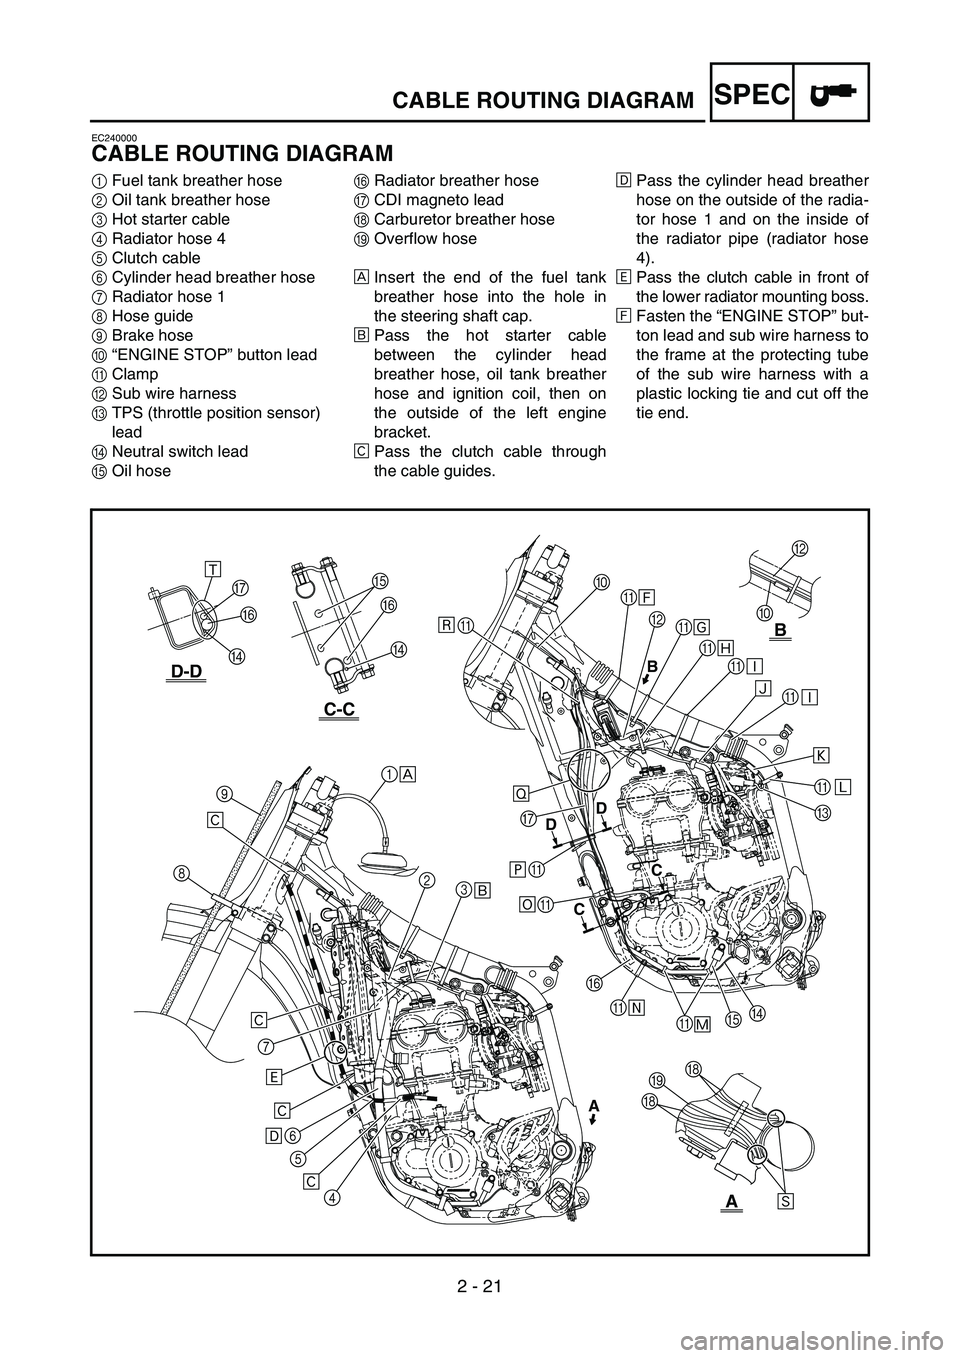 YAMAHA YZ450F 2005  Betriebsanleitungen (in German) 2 - 21
SPECCABLE ROUTING DIAGRAM
EC240000
CABLE ROUTING DIAGRAM
1Fuel tank breather hose
2Oil tank breather hose
3Hot starter cable
4Radiator hose 4
5Clutch cable
6Cylinder head breather hose
7Radiato